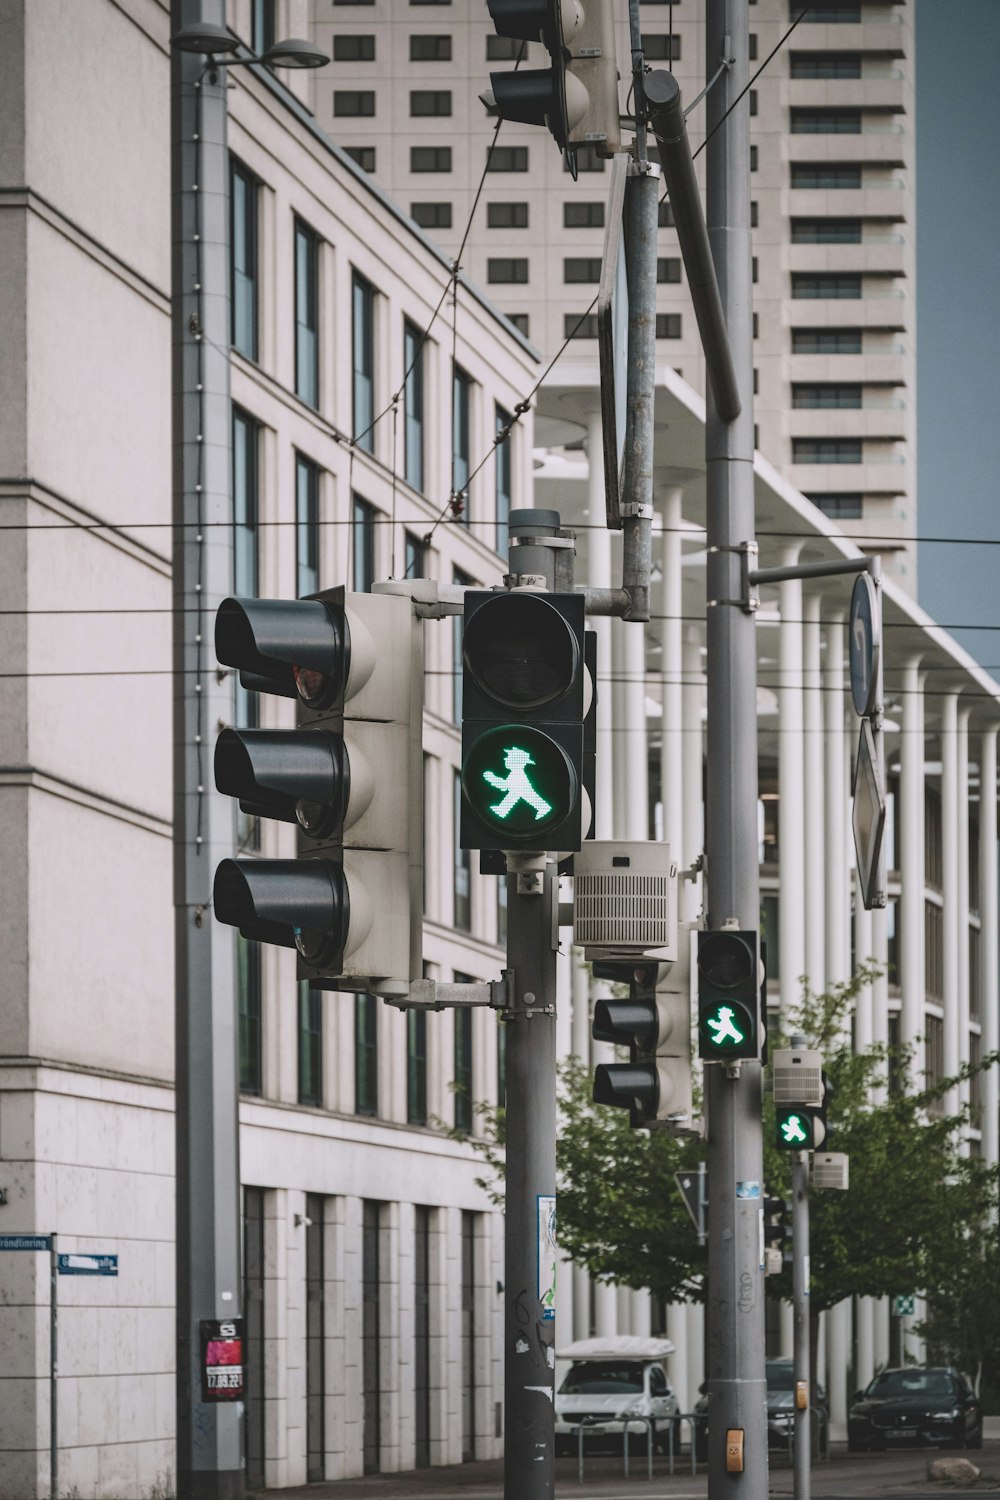 a traffic light has changed to green